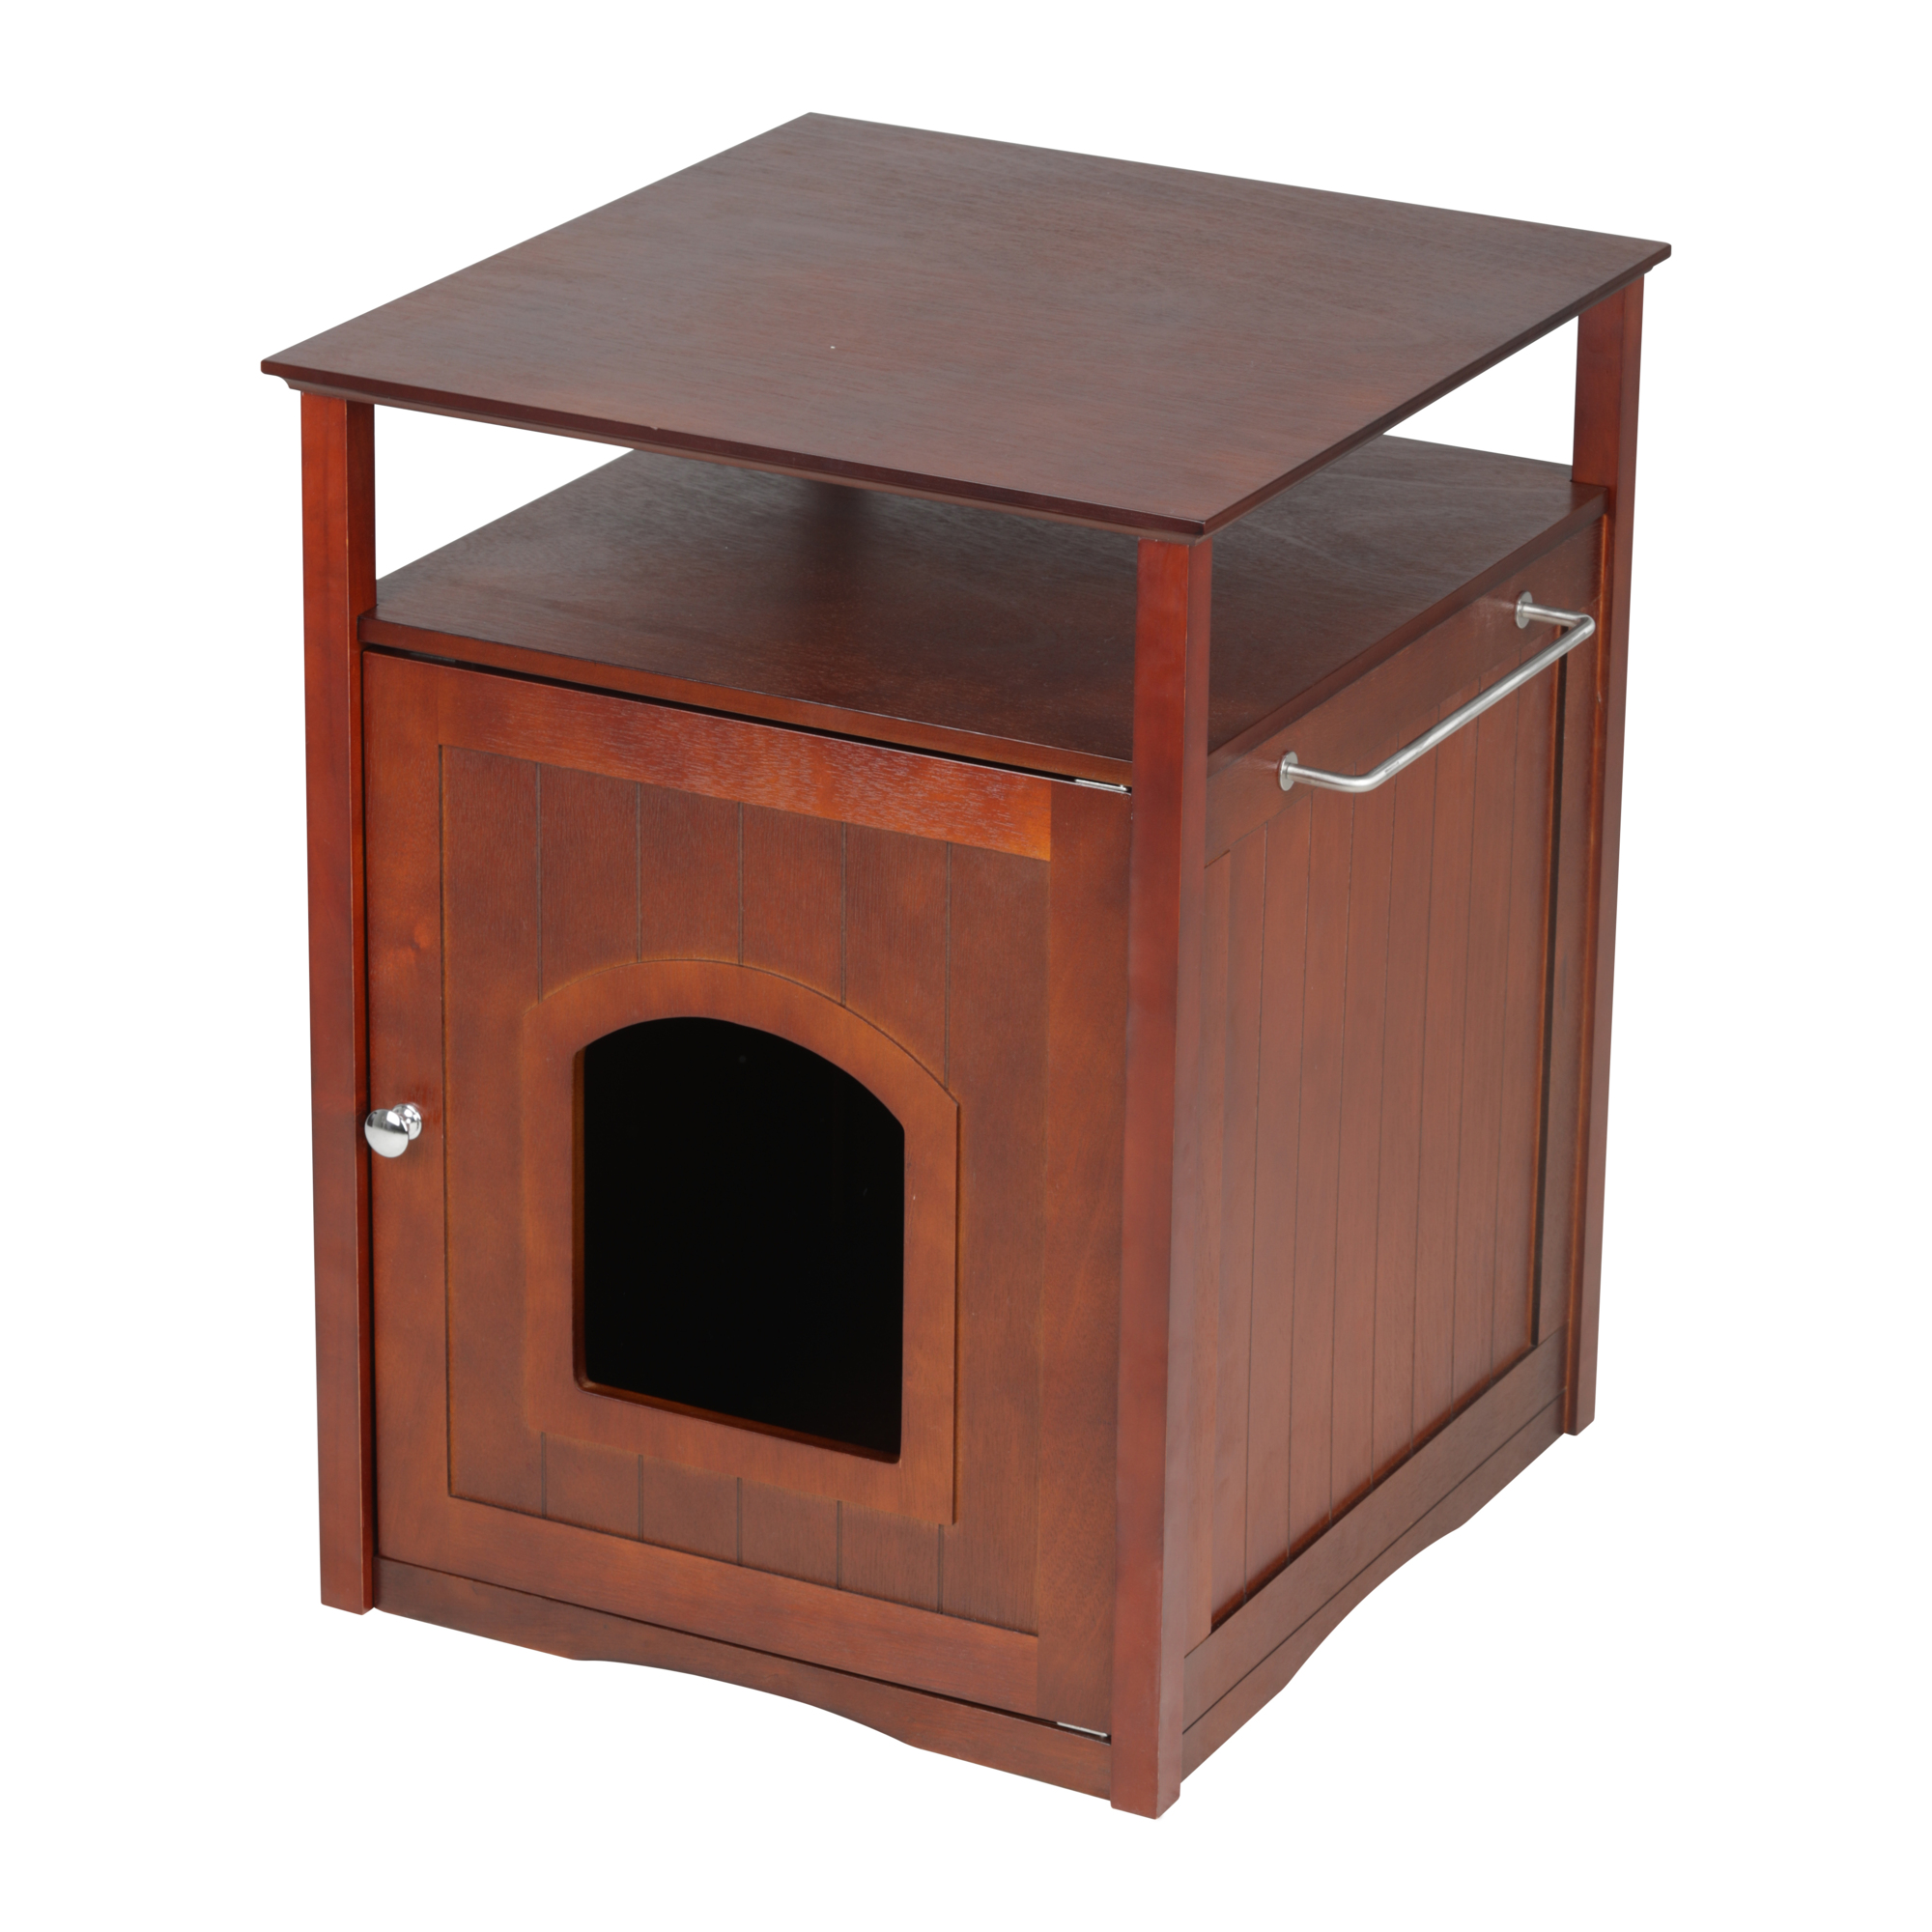 Merry Products, Cat Washroom Litter Box Cover/Night Stand,Walnut, Model MPS008